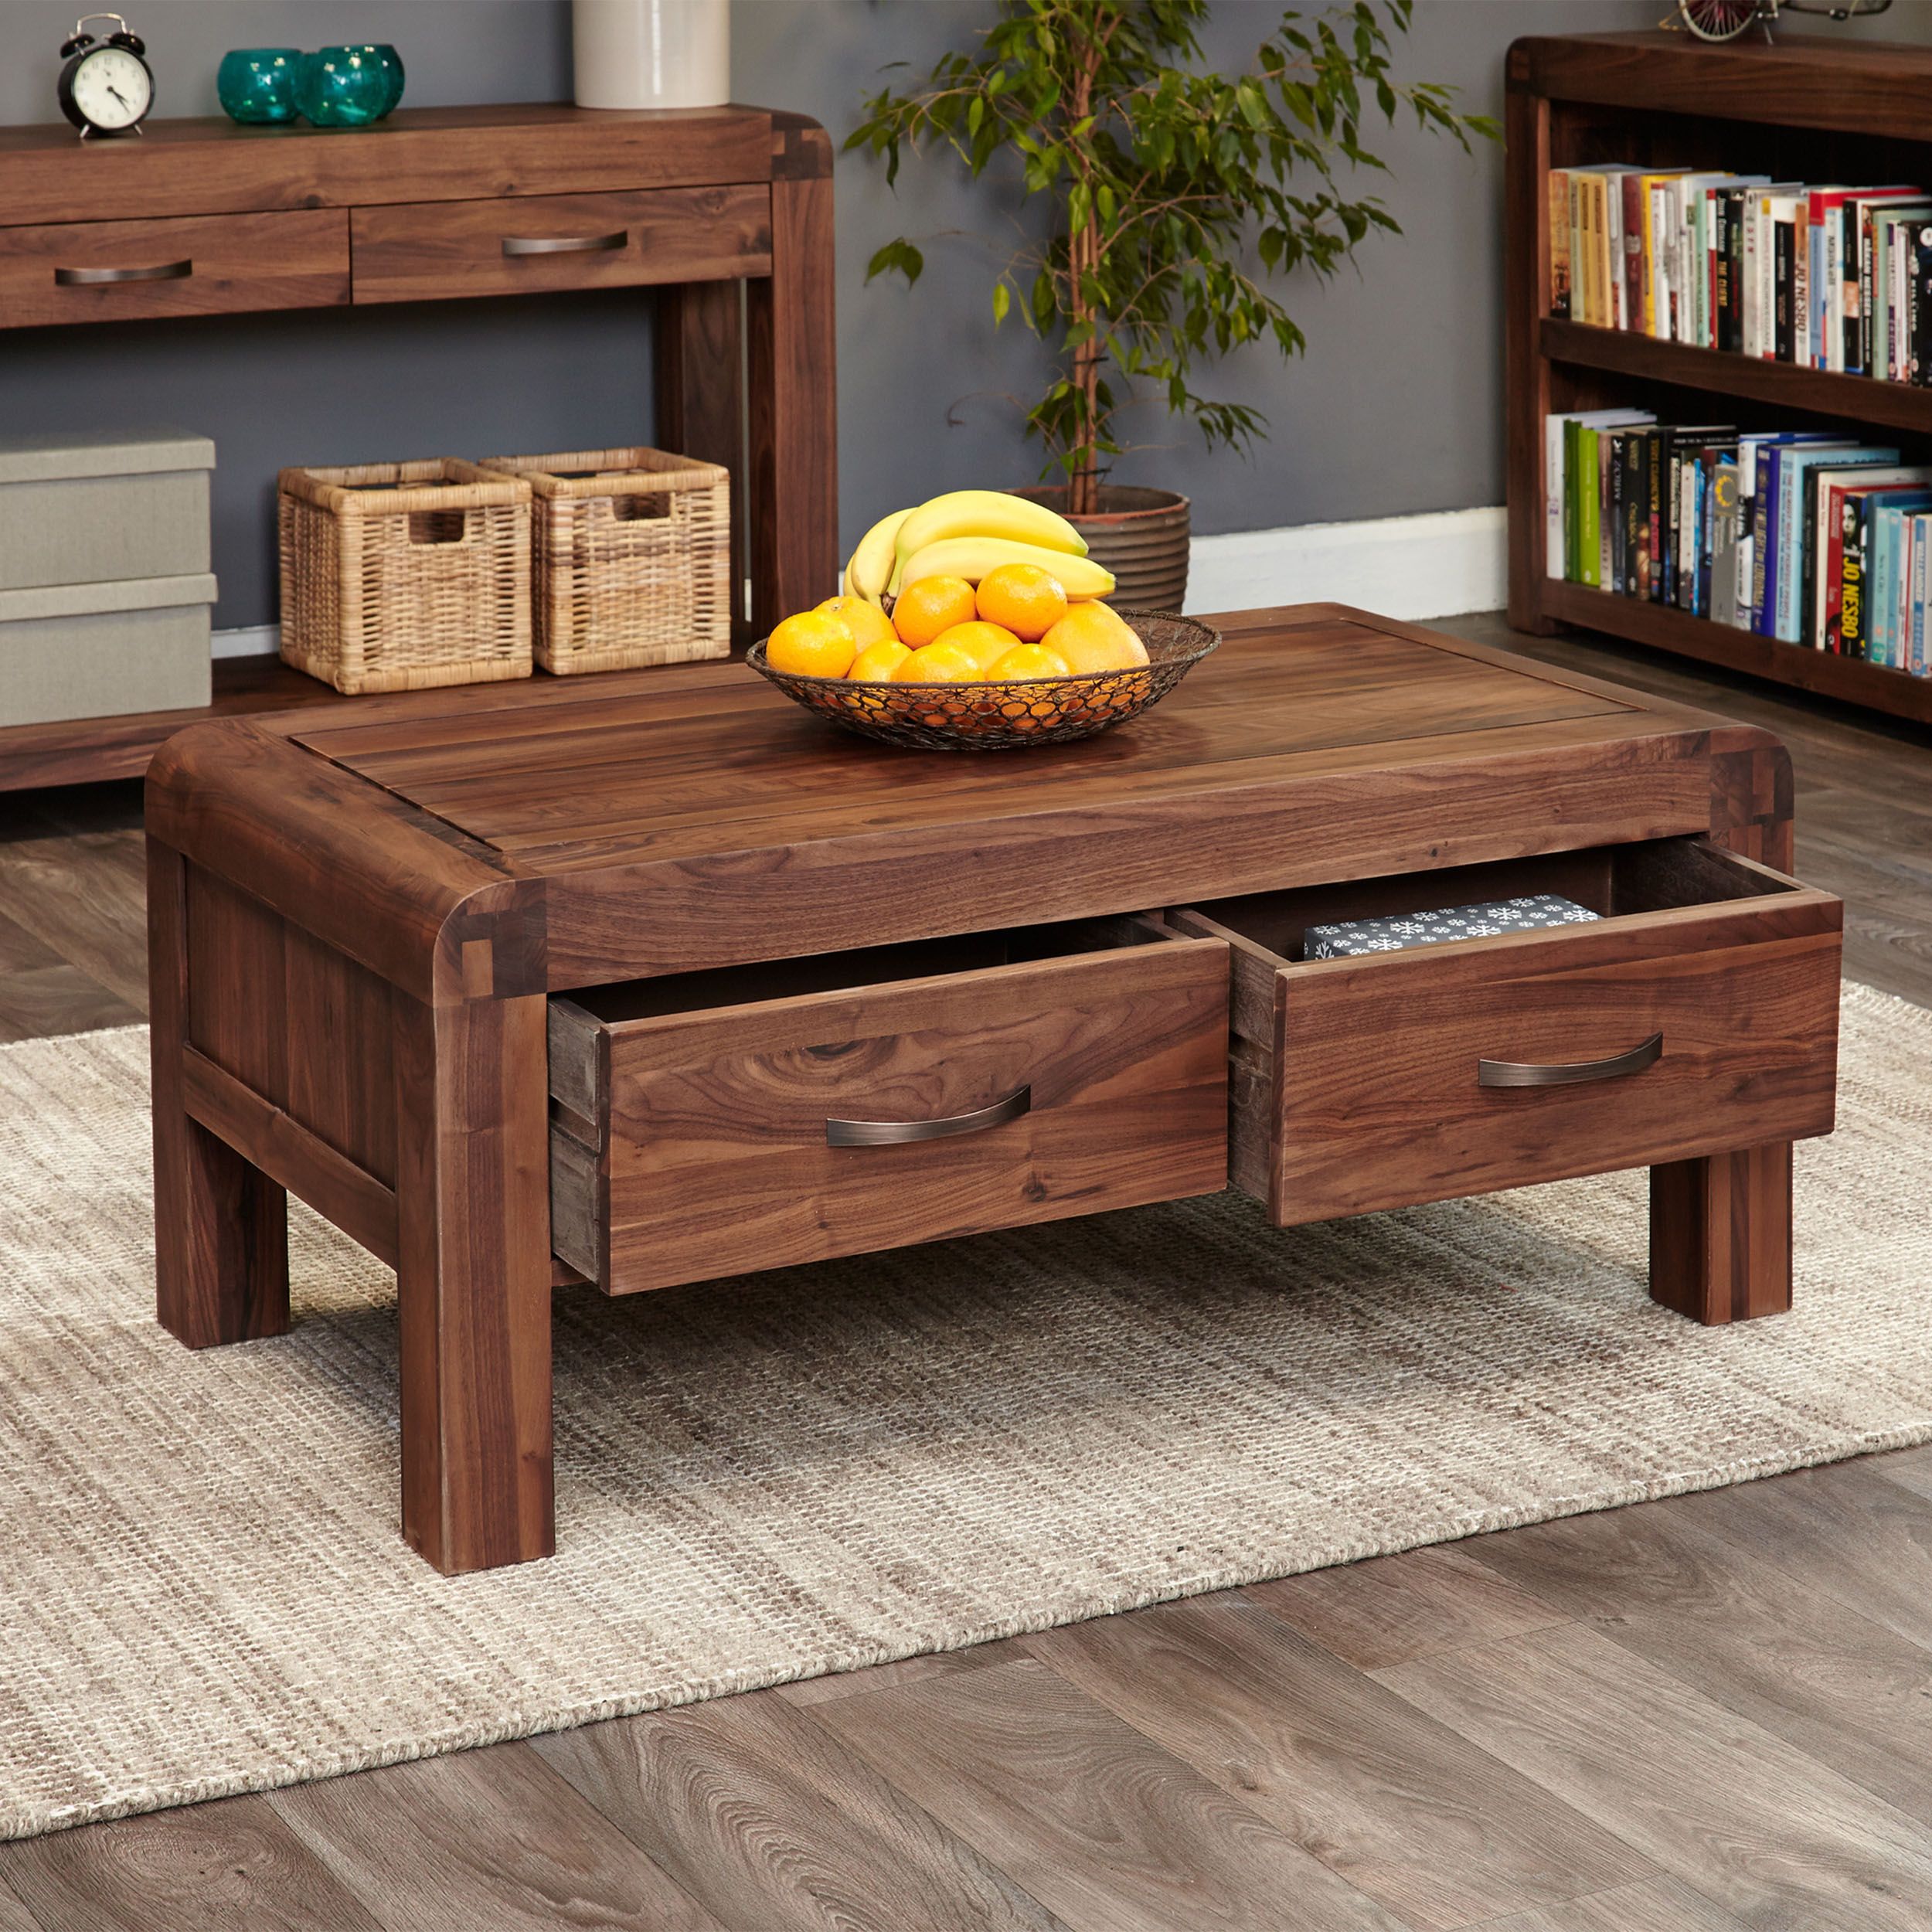 Solid Walnut Coffee Table With Storage – Shiro Throughout Coffee Tables With Open Storage Shelves (Gallery 2 of 20)